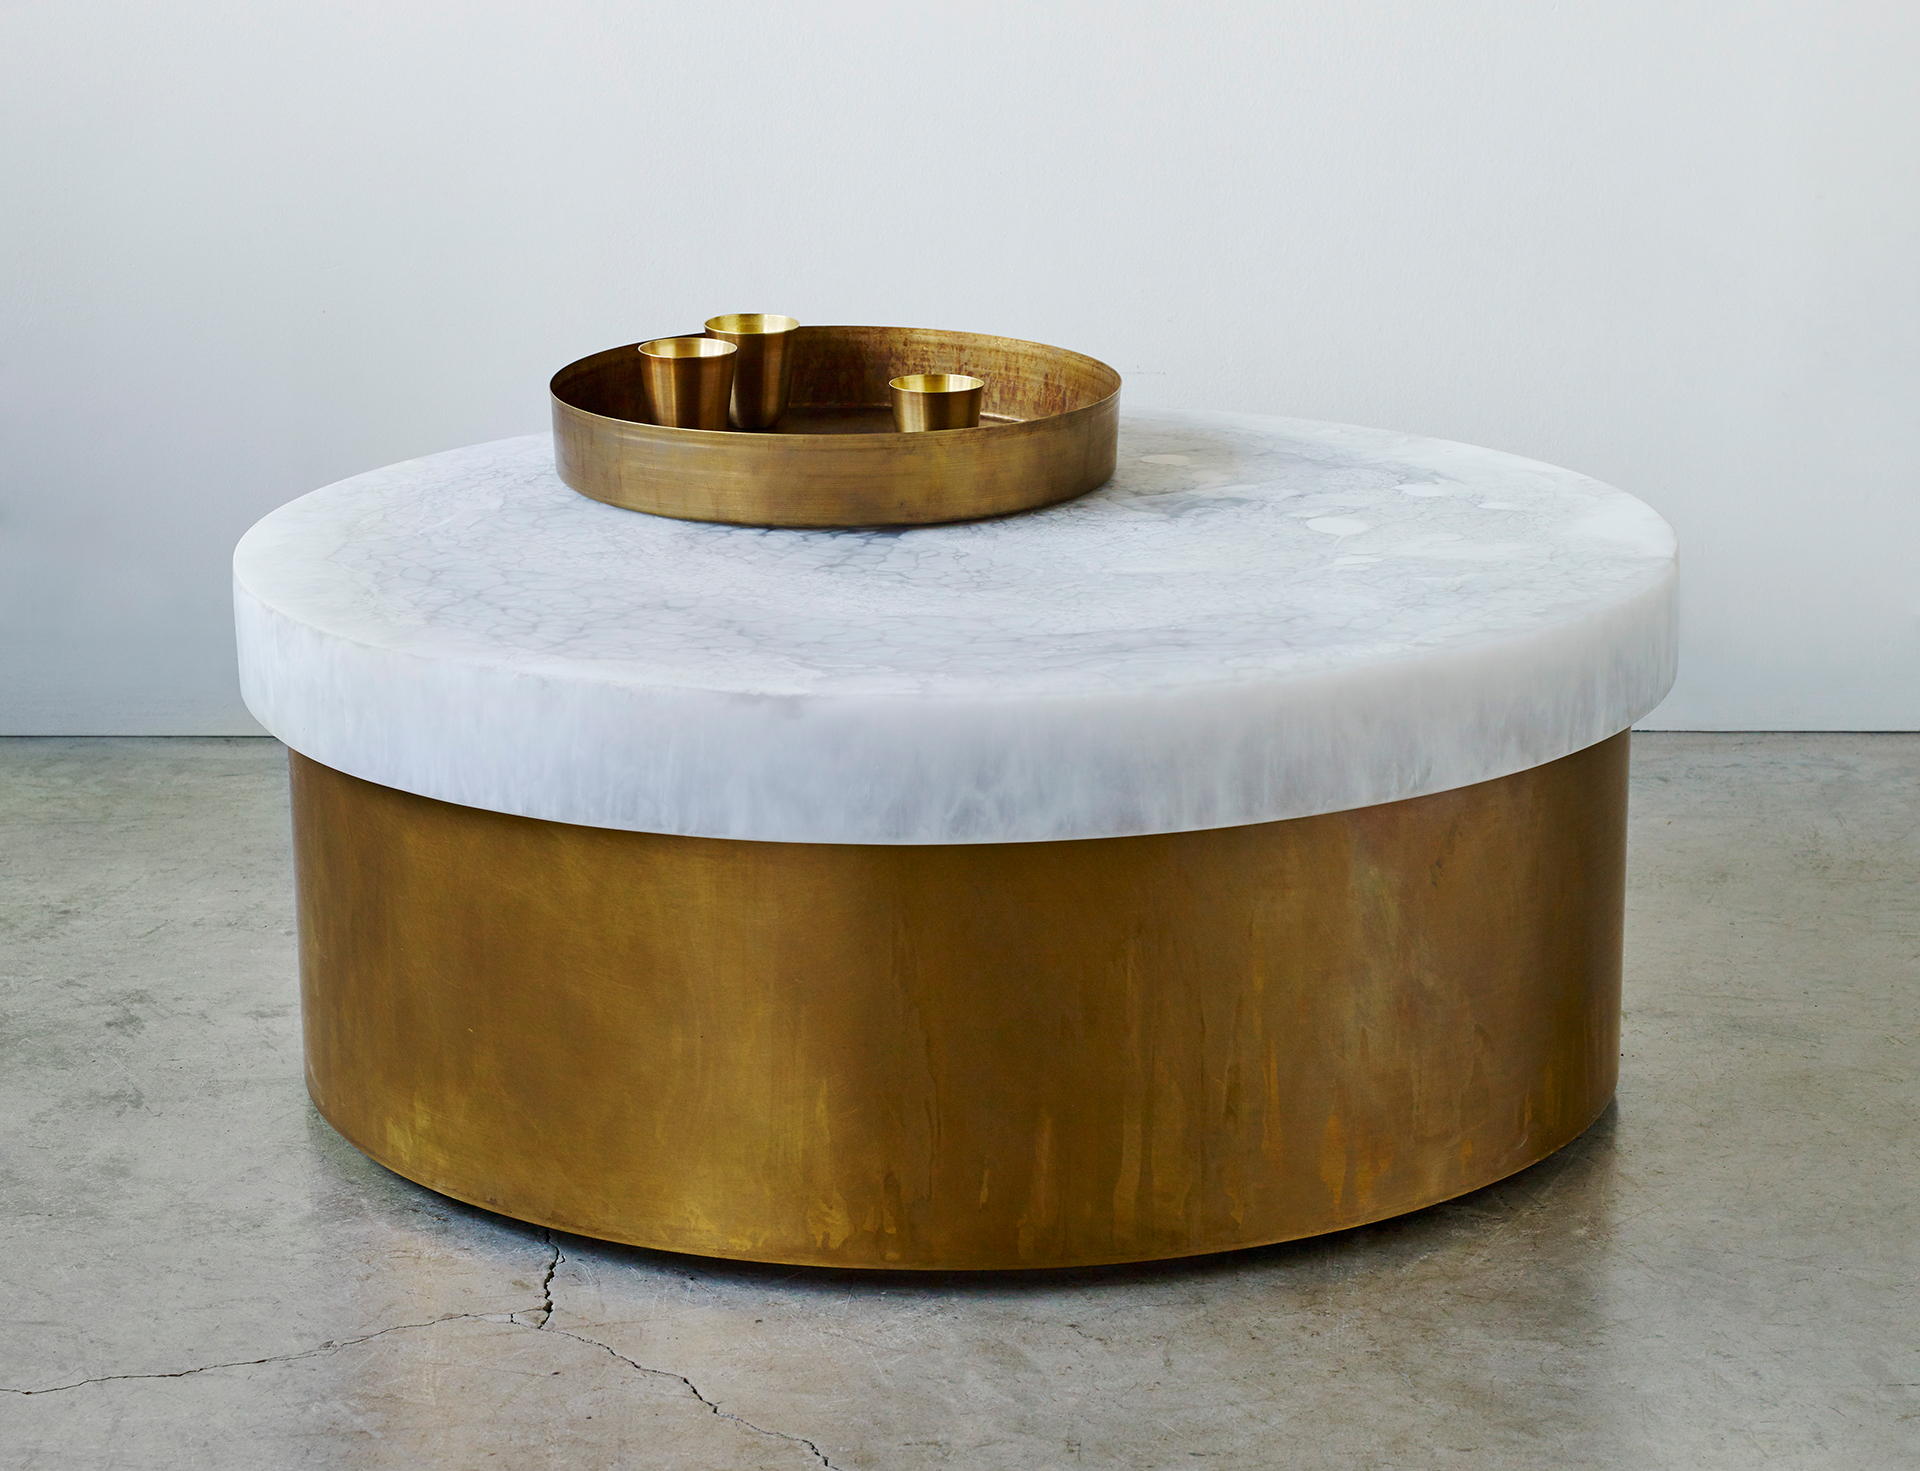 The Fusion small modern coffee table is made of resin and brass and is hand patinated in a stunning antique finish. Inquire for purchase at Studio Sturdy. Created by Martha Sturdy